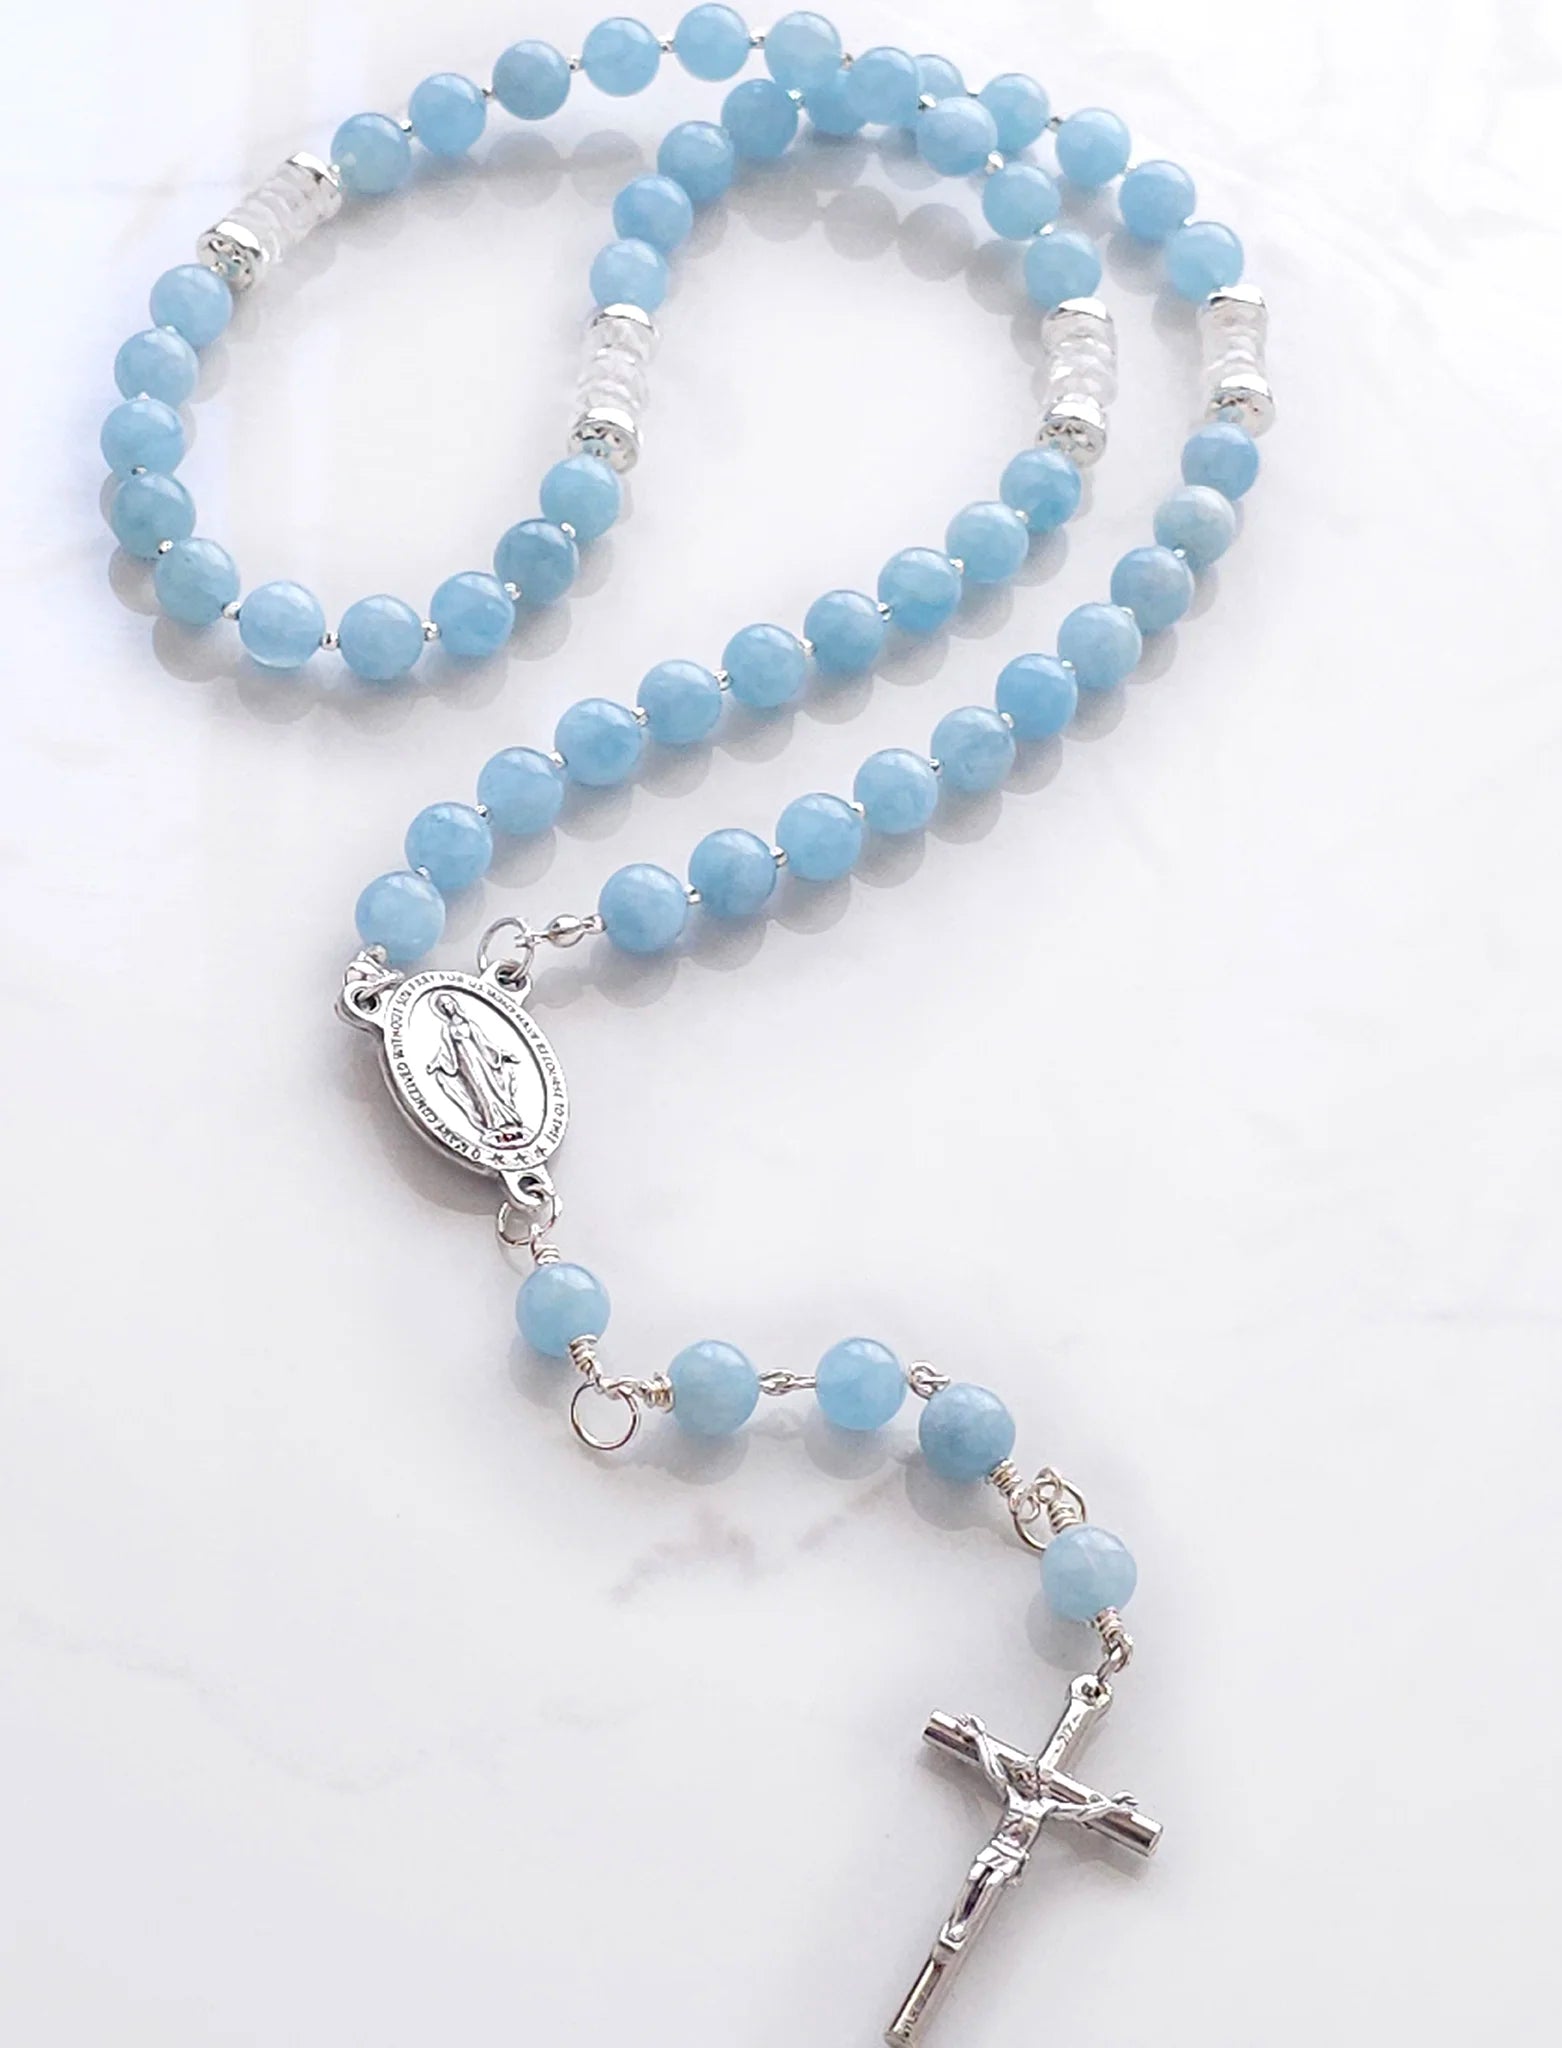 Blue rosary with natural Aquamarine beads, complemented by Sterling Silver spacers, laid on a white table.